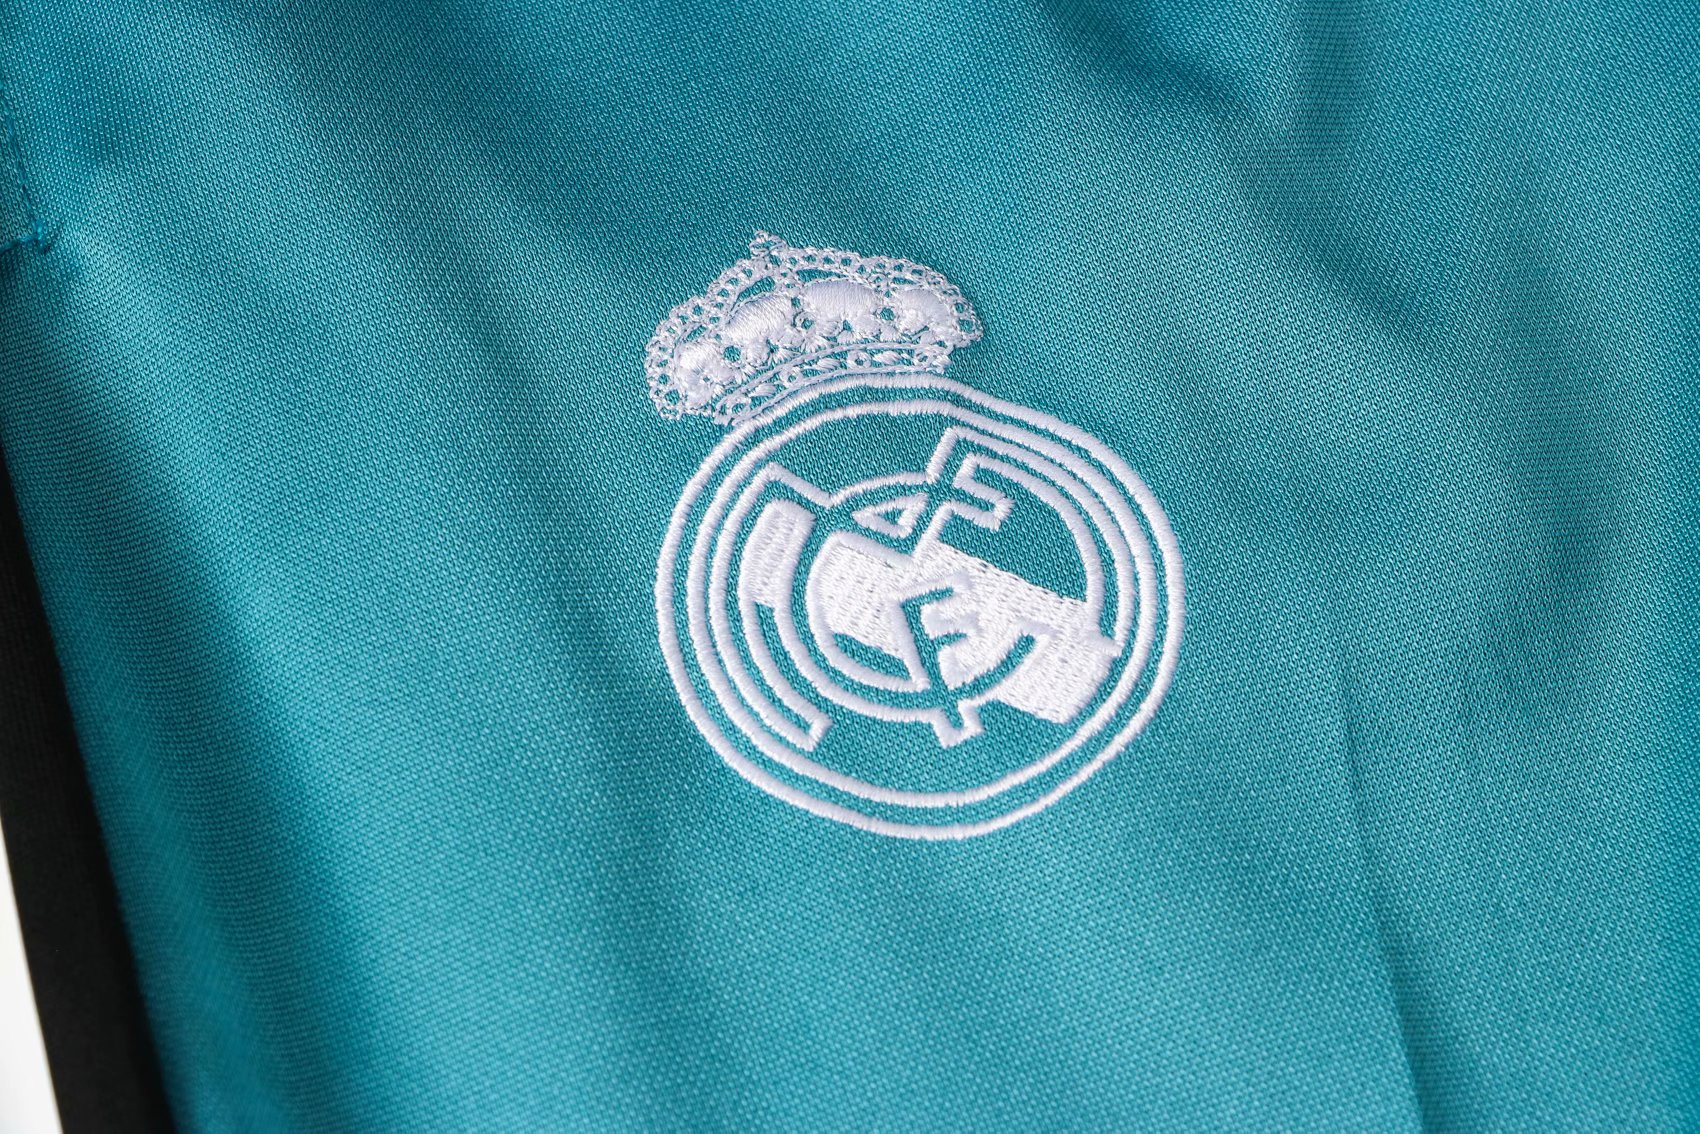 Real Madrid Soccer Training Suit Jacket + Pants Green Mens 2021/22